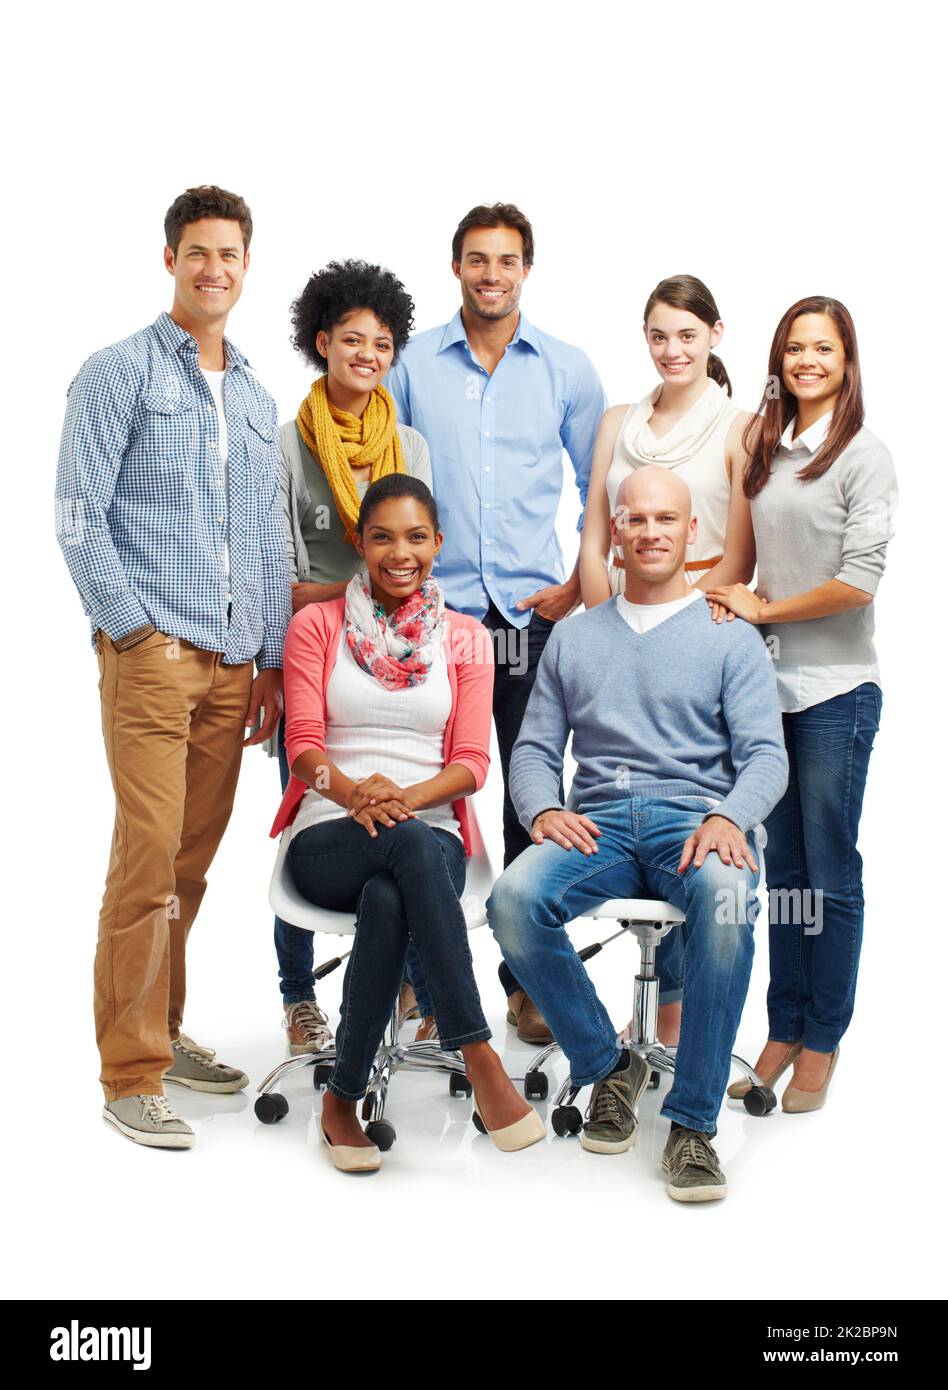 Theyre a smiling group. Smiling group of casual young adults together against a white background. Stock Photo